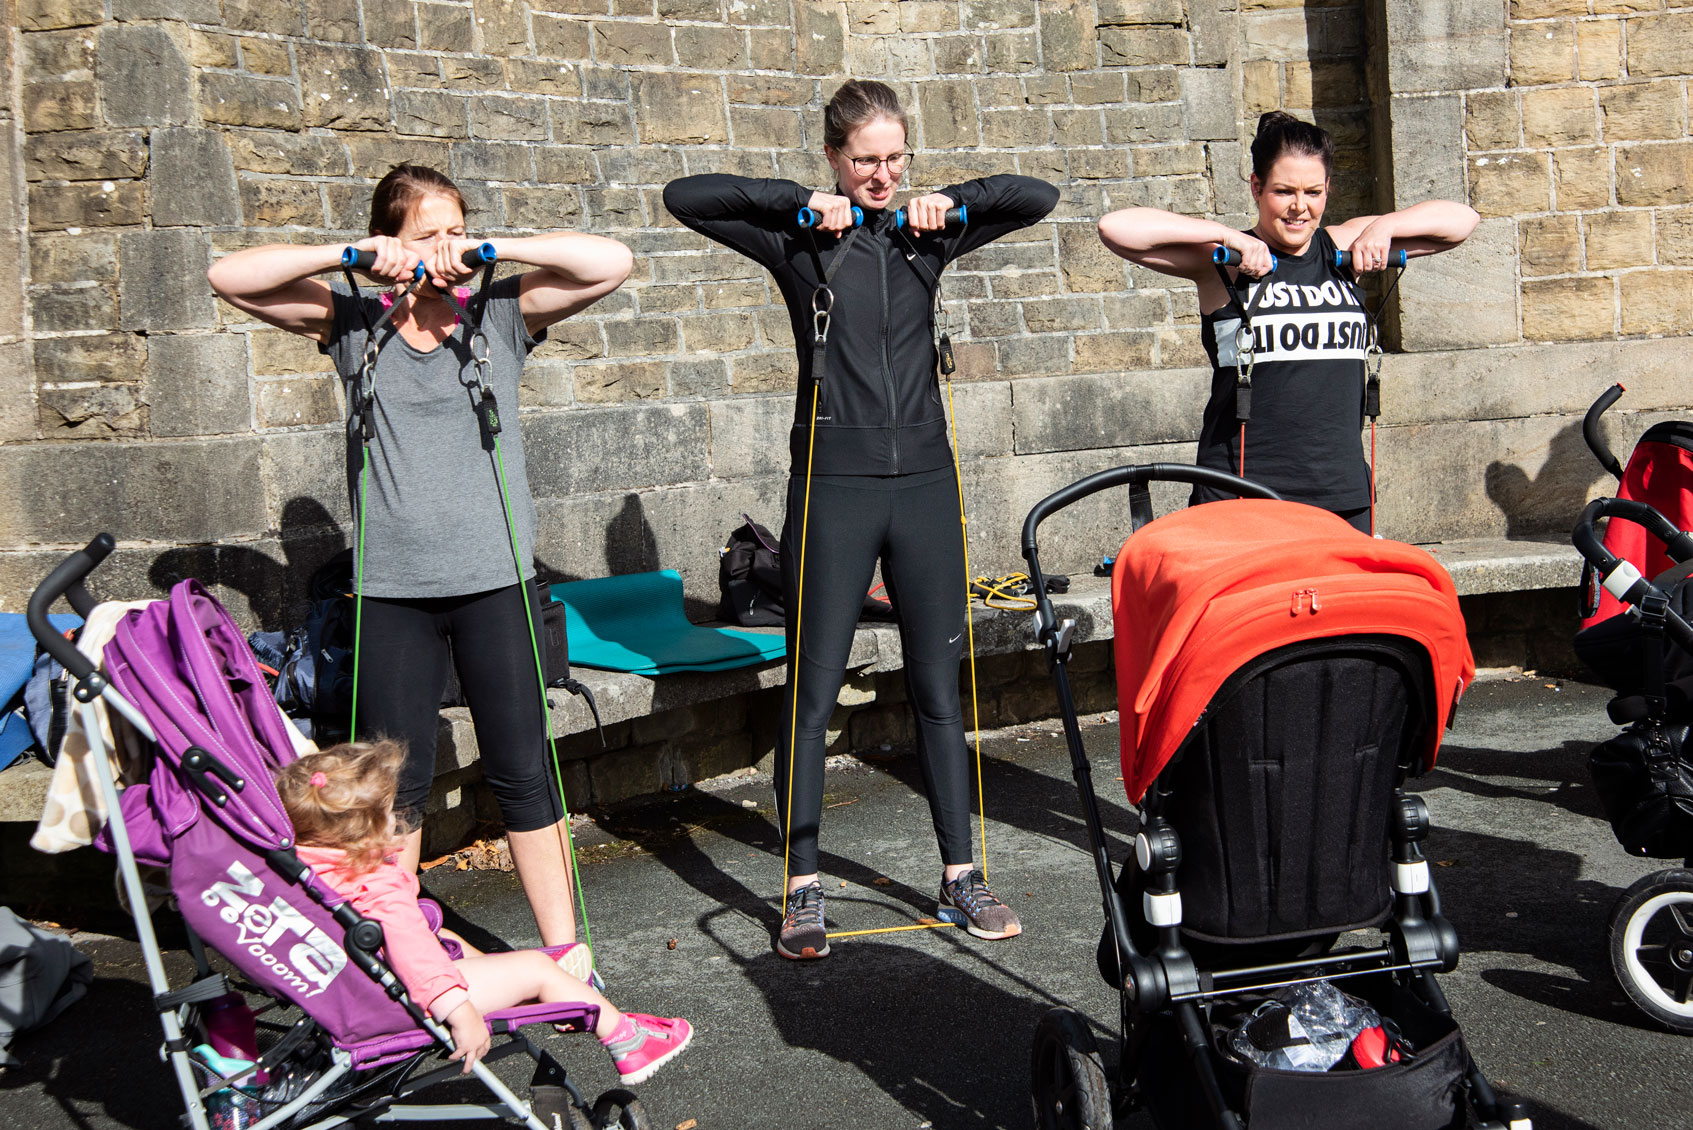 Buggy 4 Fitness Calderdale